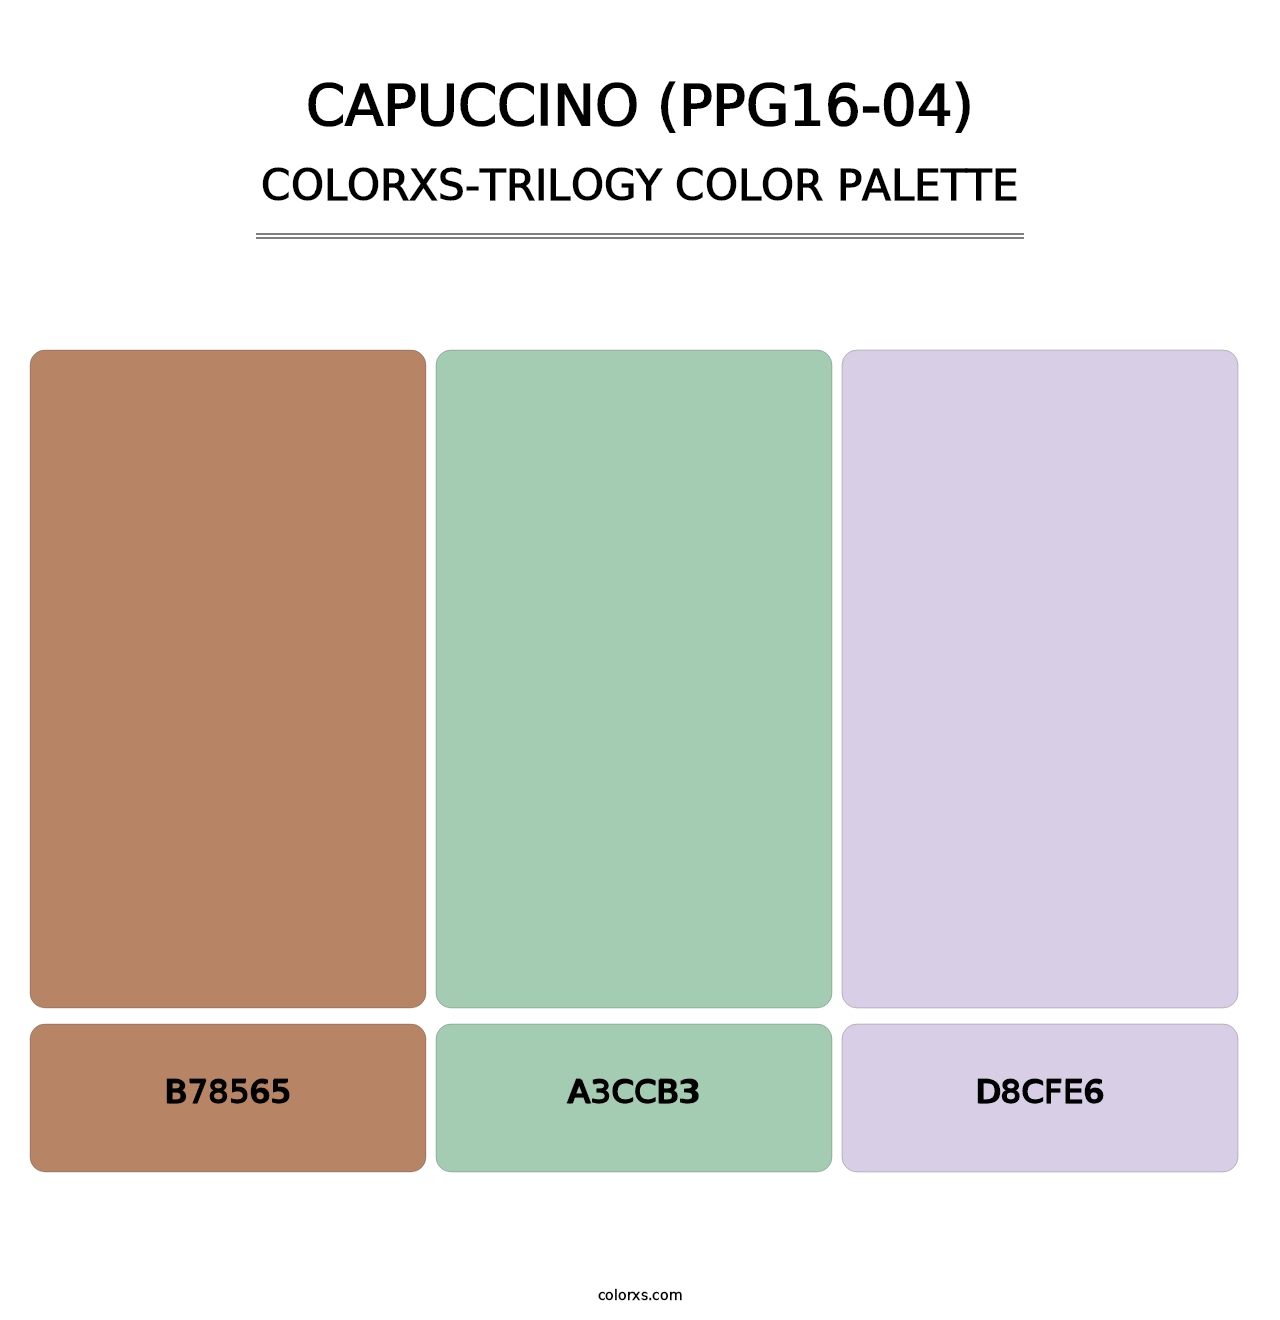 Capuccino (PPG16-04) - Colorxs Trilogy Palette